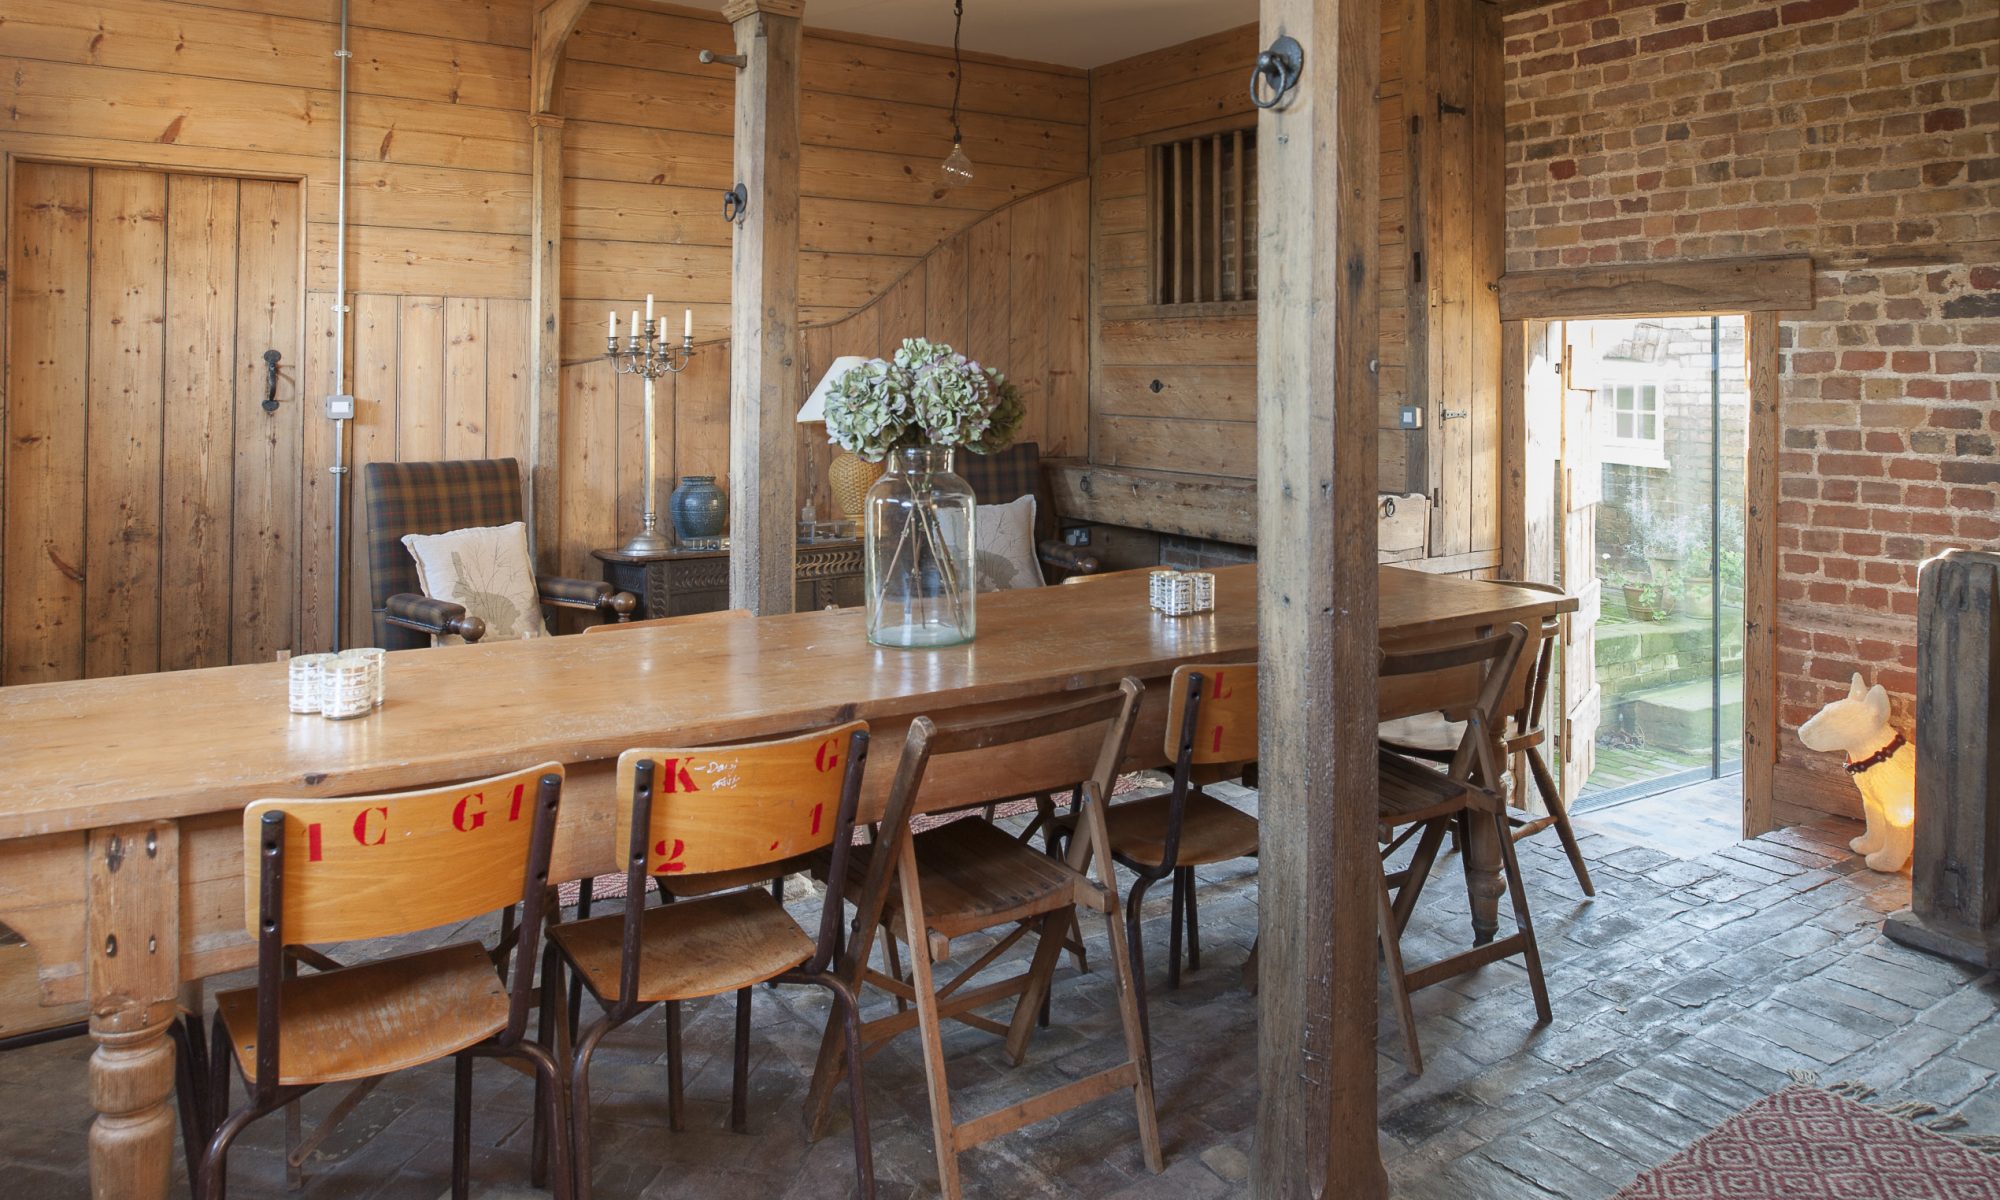 The pièce de résistance of Amy and Adrian’s conversion is the coach house. At one end of the room are the original hay feeders and mangers, now, like all the woodwork, sandblasted and pristine